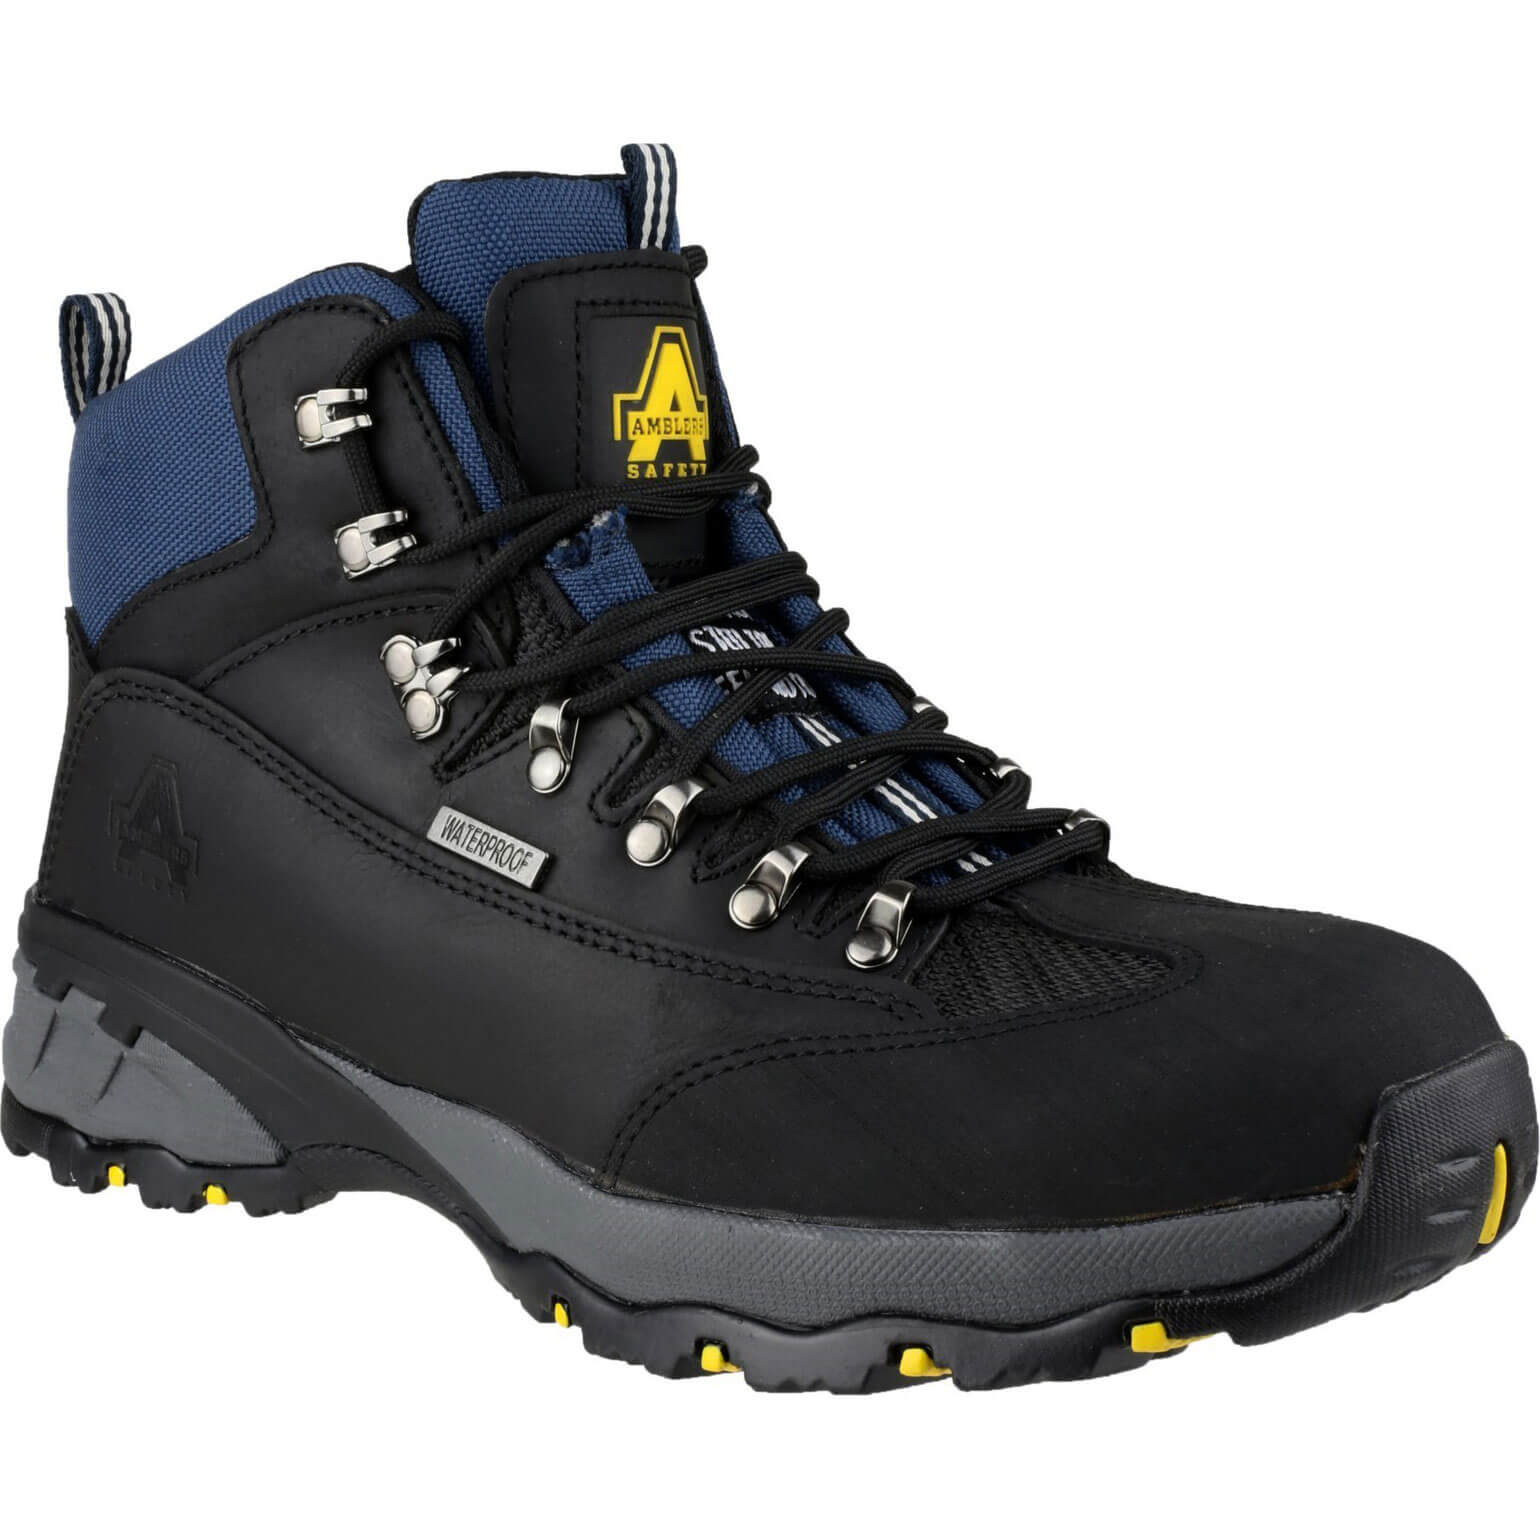 Image of Amblers Mens Safety FS161 Waterproof Hiker Safety Boots Black Size 13